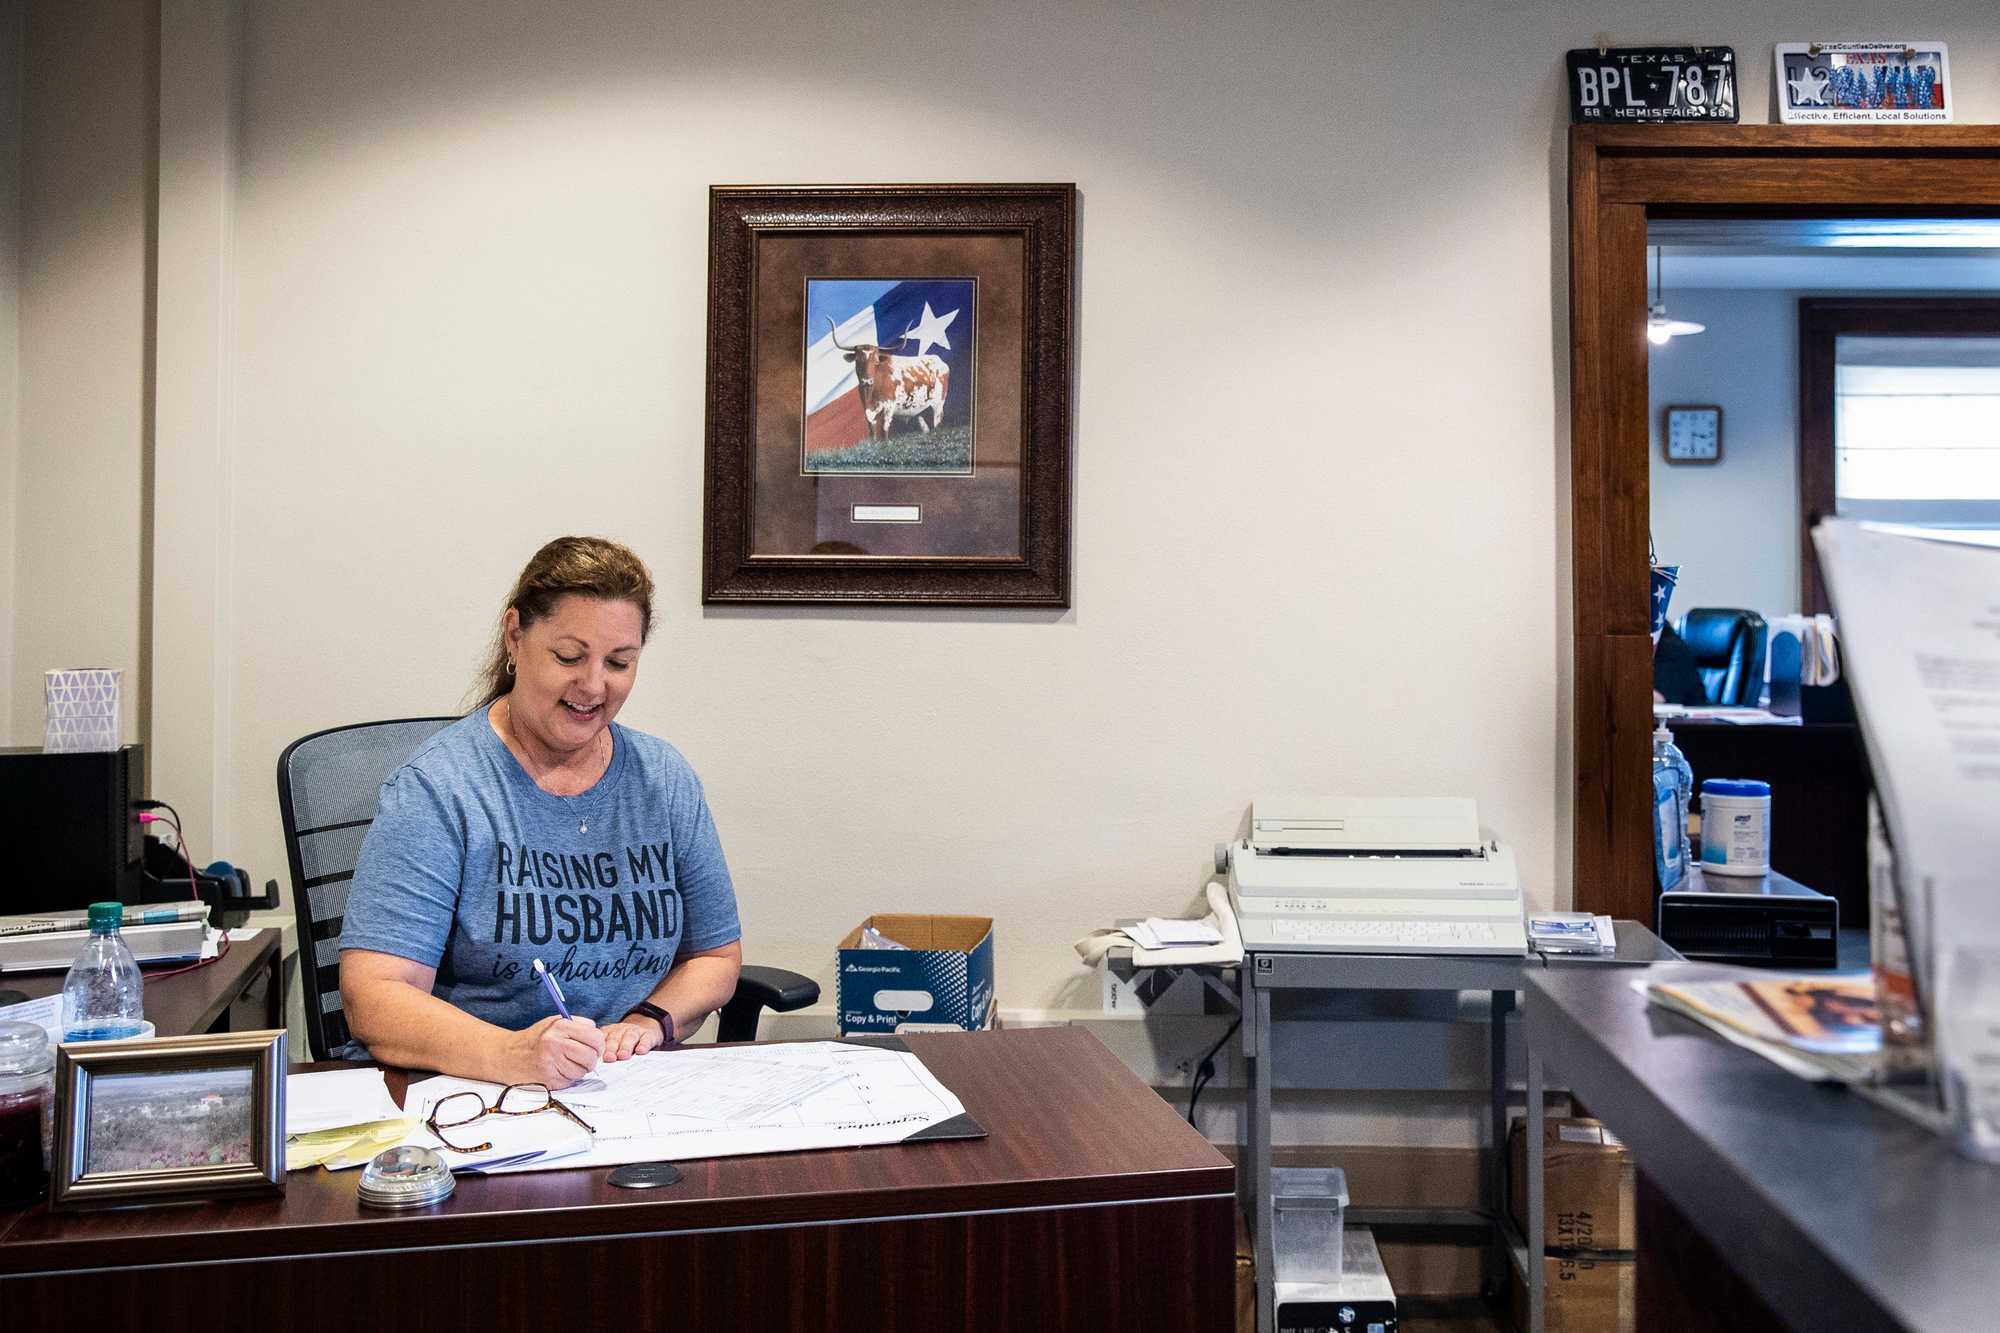 Holly Jackson, who is married to William, at work in the courthouse in Miami, Texas. Her shirt said, "Raising my husband is exhausting." 